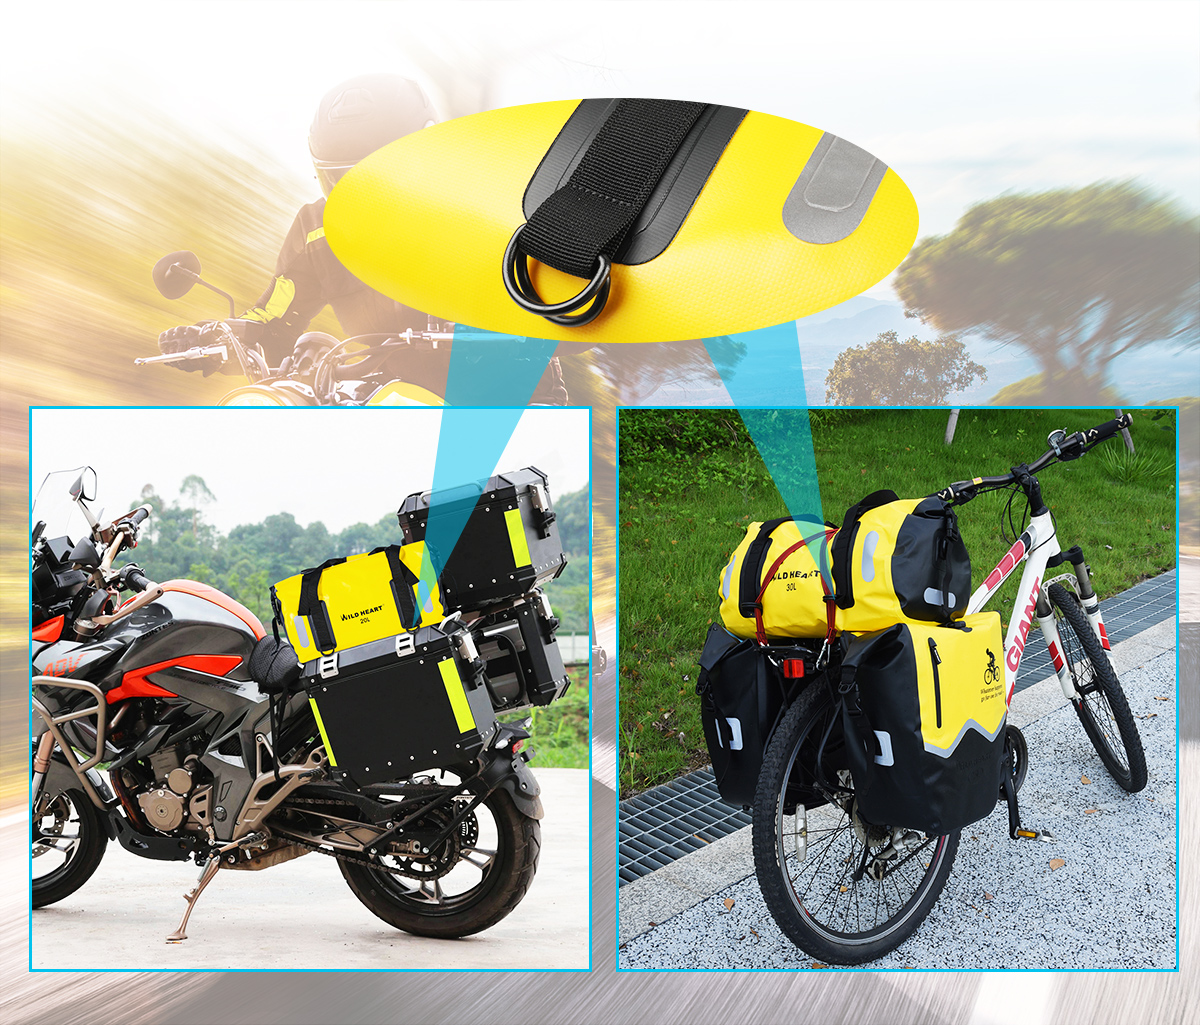  WILD HEART Waterproof Bag 55L 66L 77L Motorcycle Dry Duffel Bag  for Travel,Motorcycling, Cycling,Hiking,Camping (55L, Yellow) : Automotive